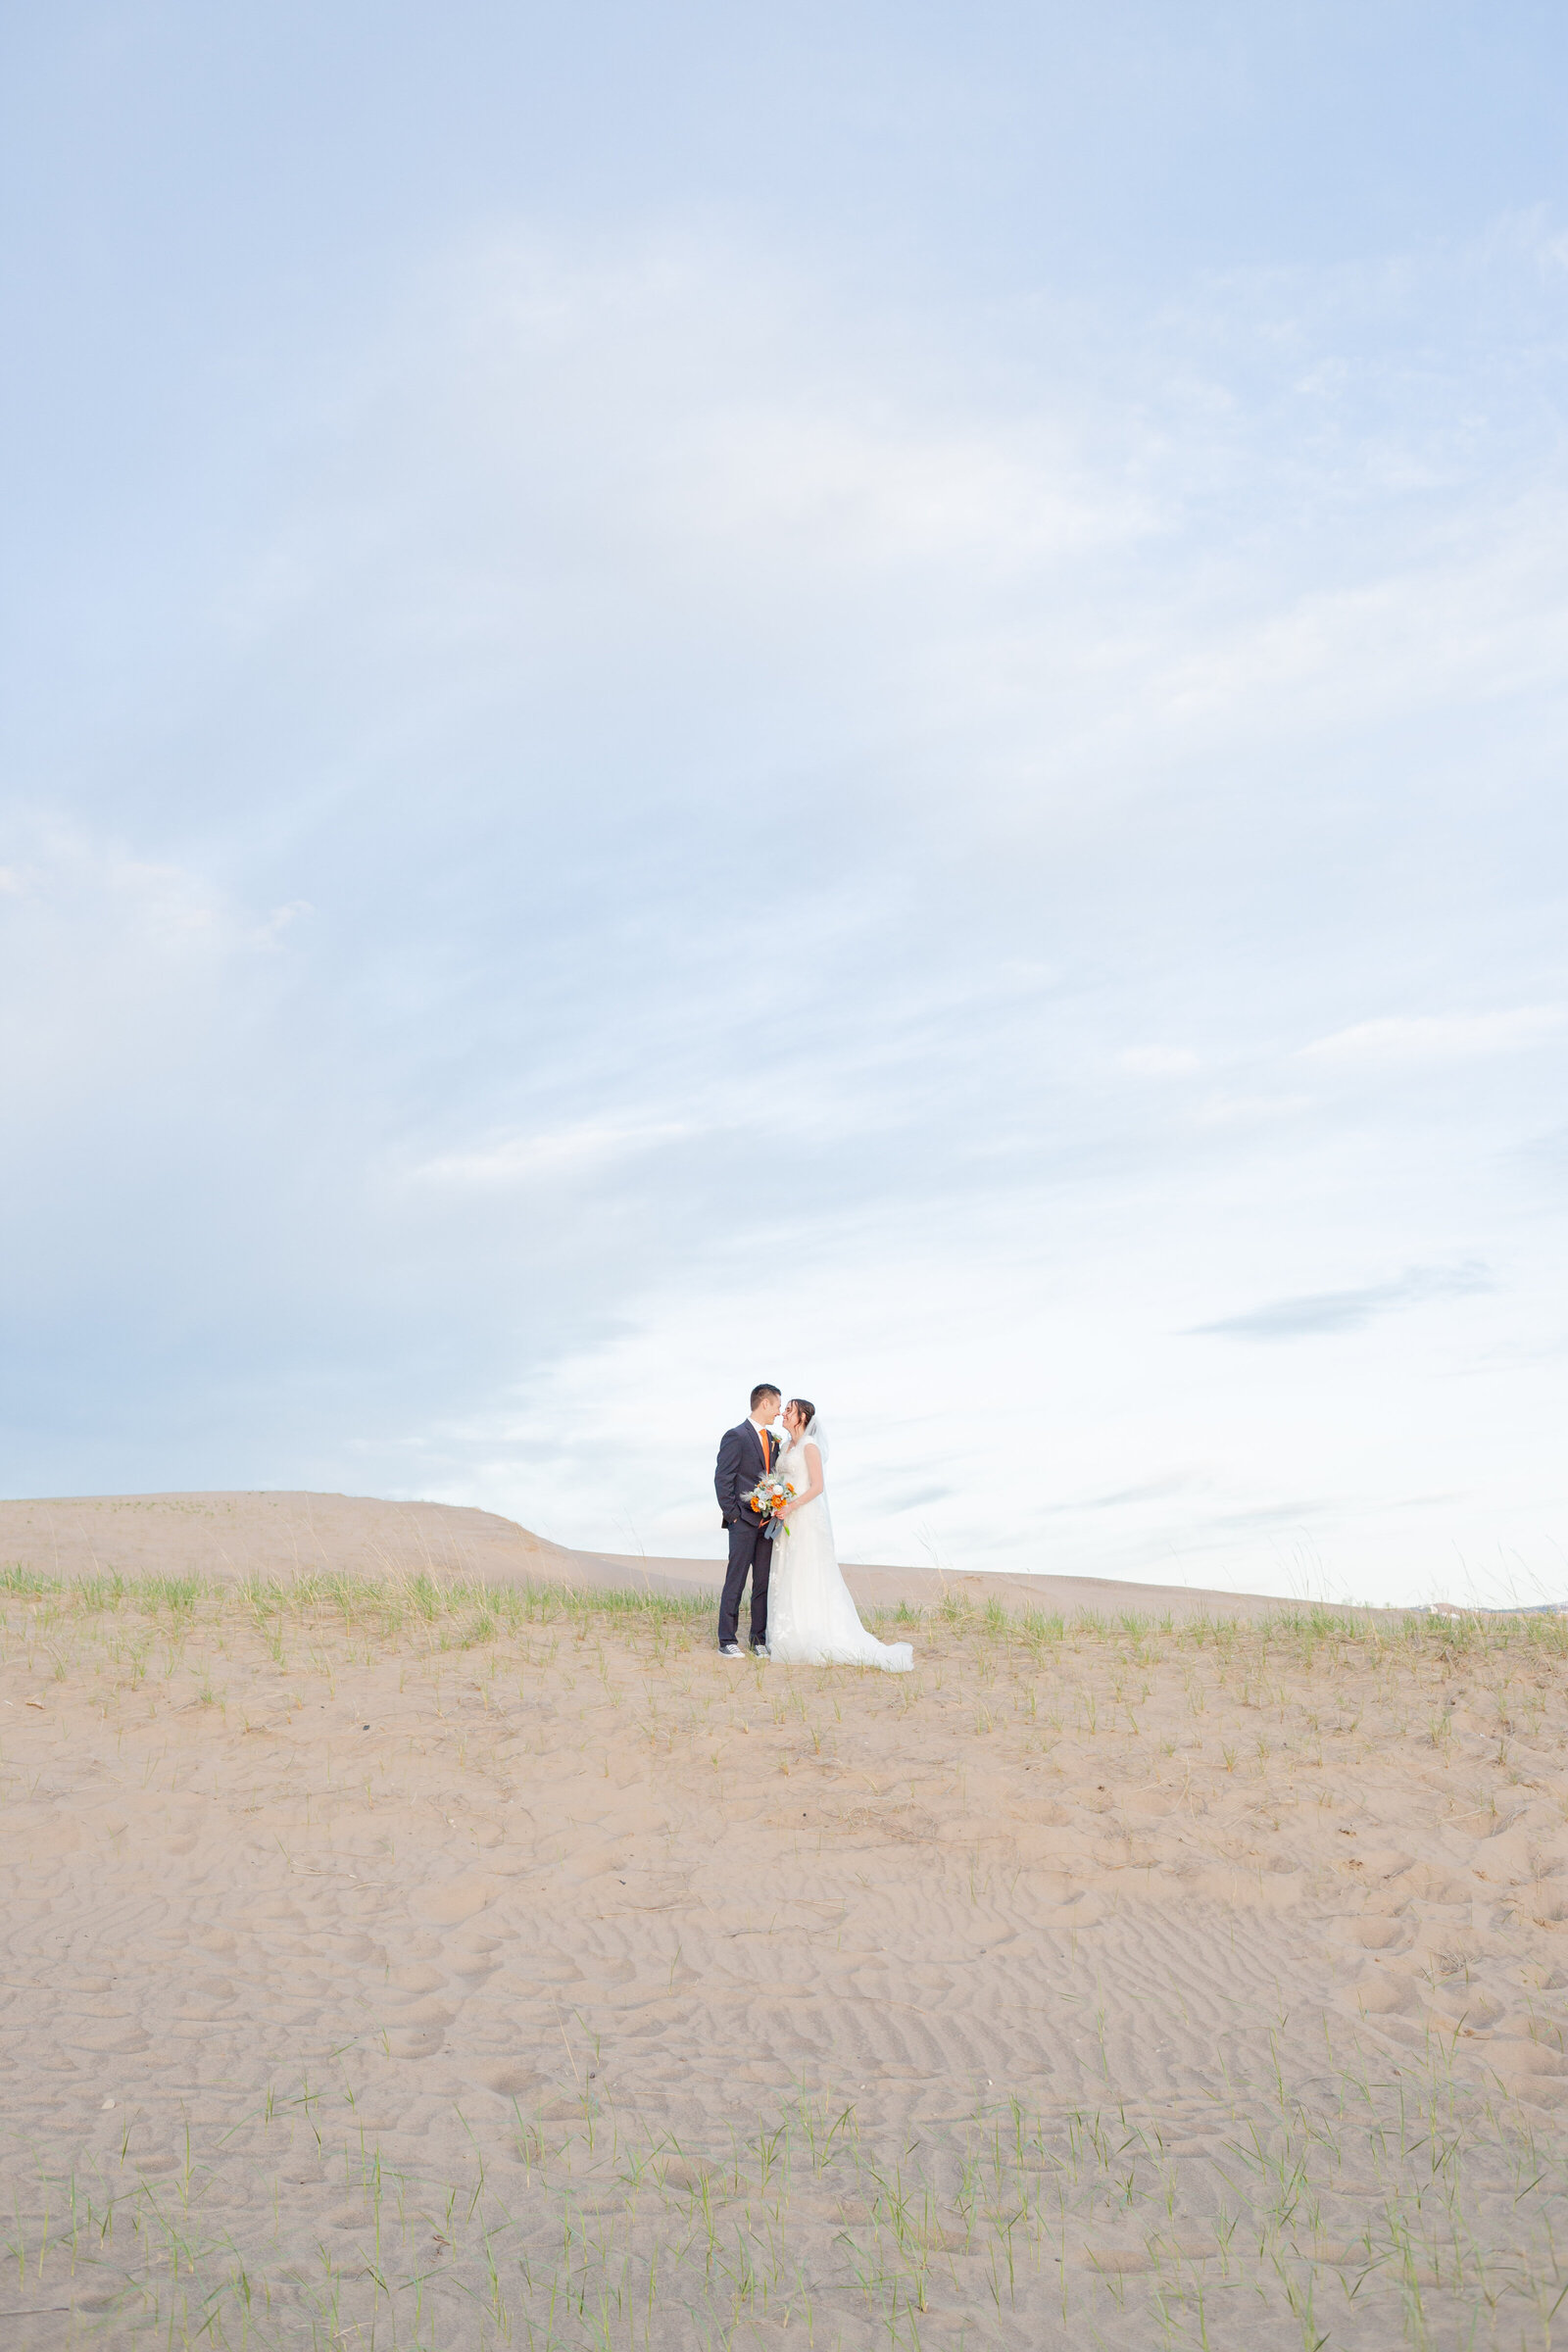 Washington Elopement Photographer captures bride and groom on beach after PNW wedding